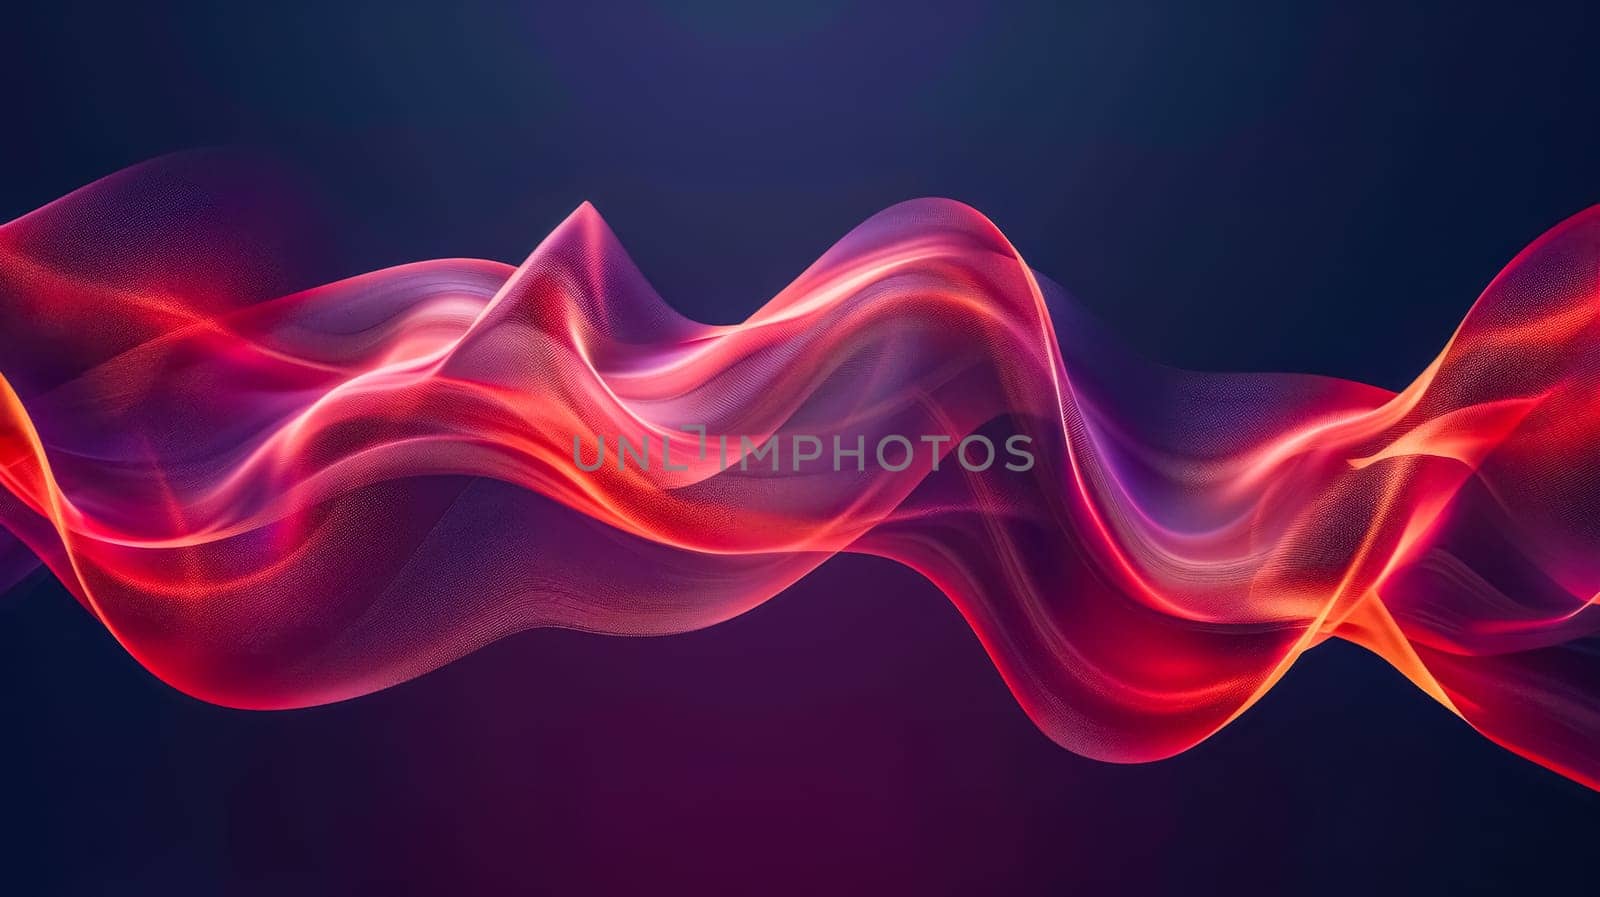 Vibrant digital art of a dynamic, flowing wave pattern with a gradient of pink and purple hues by Edophoto